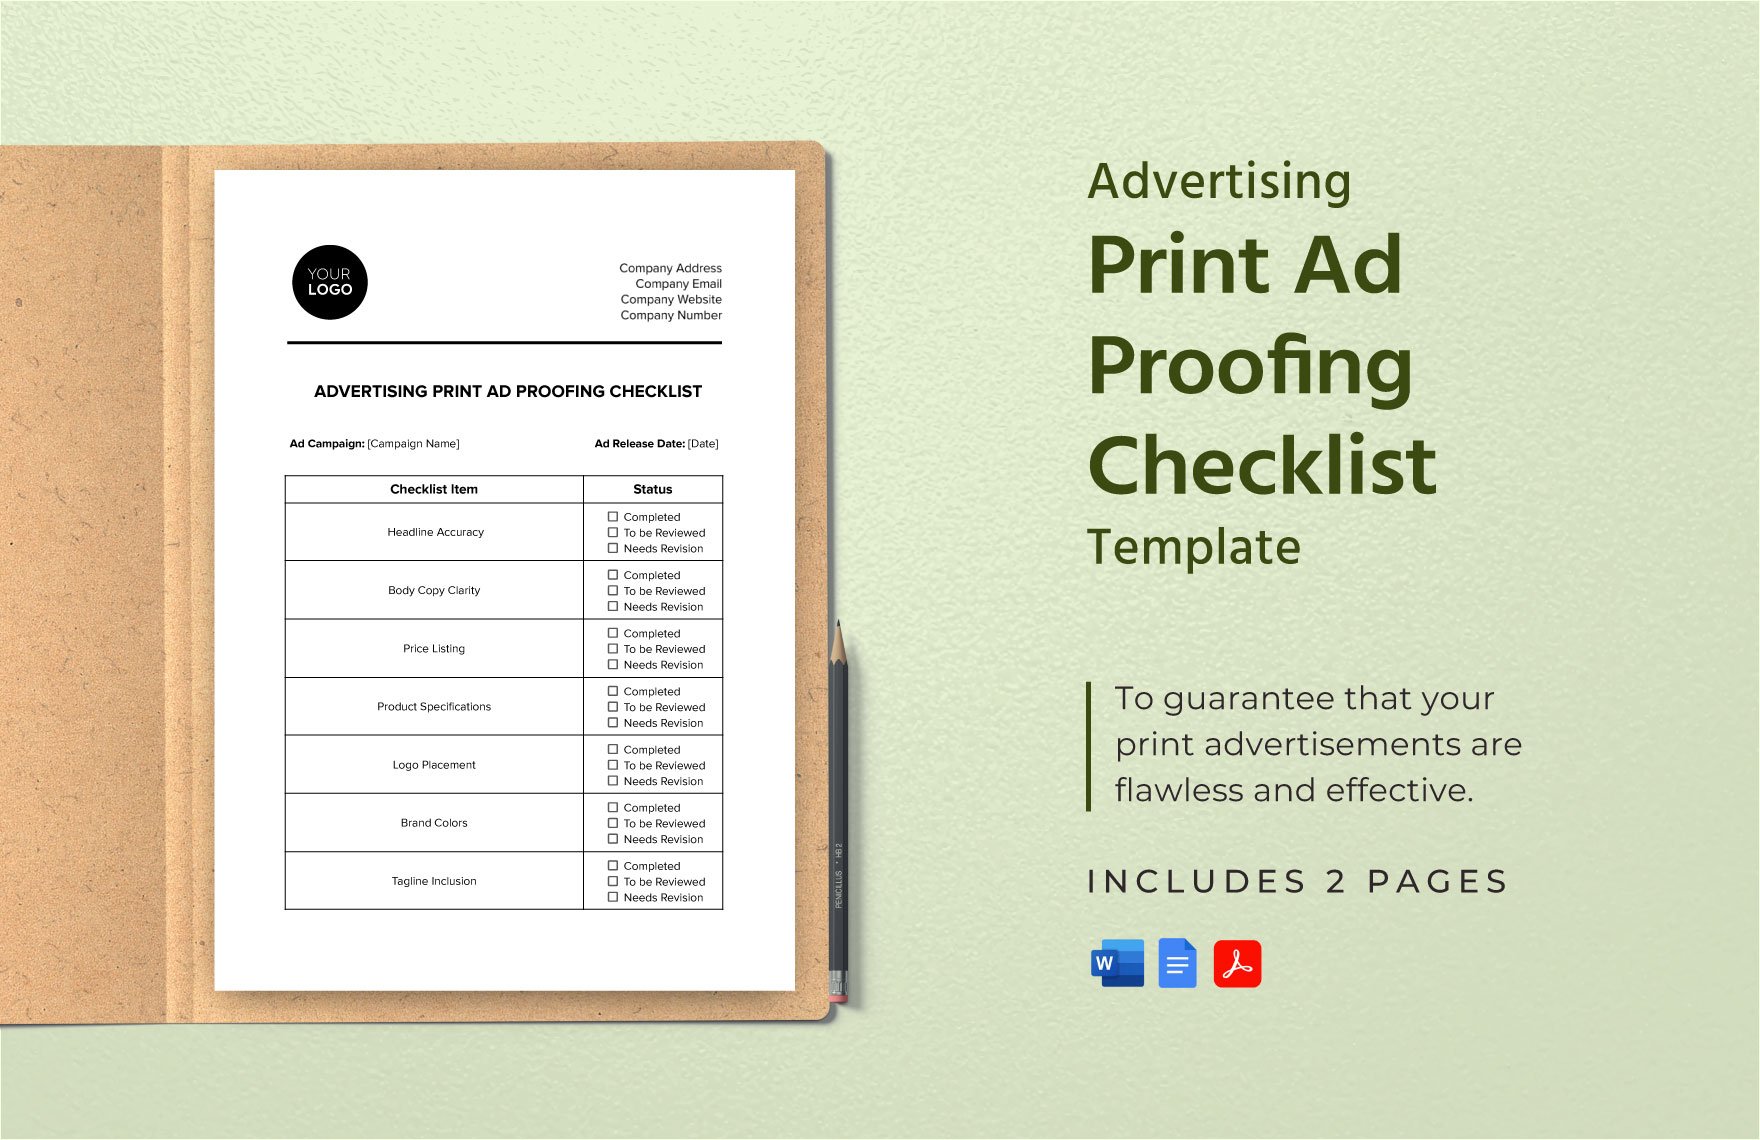 Advertising Print Ad Proofing Checklist Template in Word, Google Docs, PDF